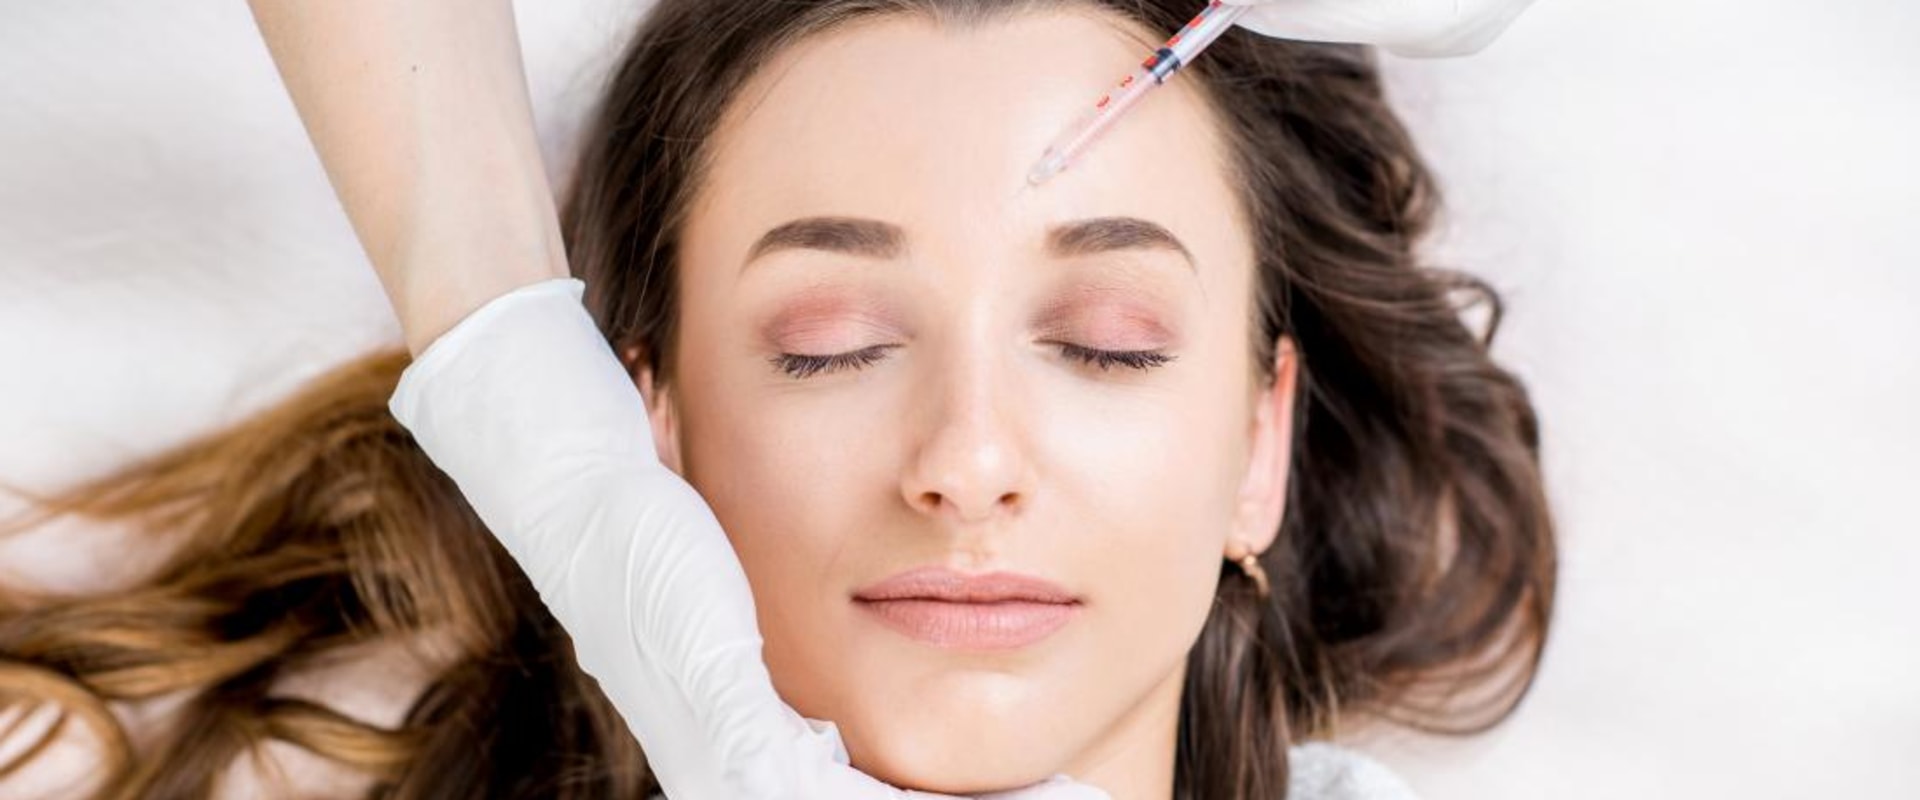 Which Fillers or Botox are Safer: An Expert's Perspective